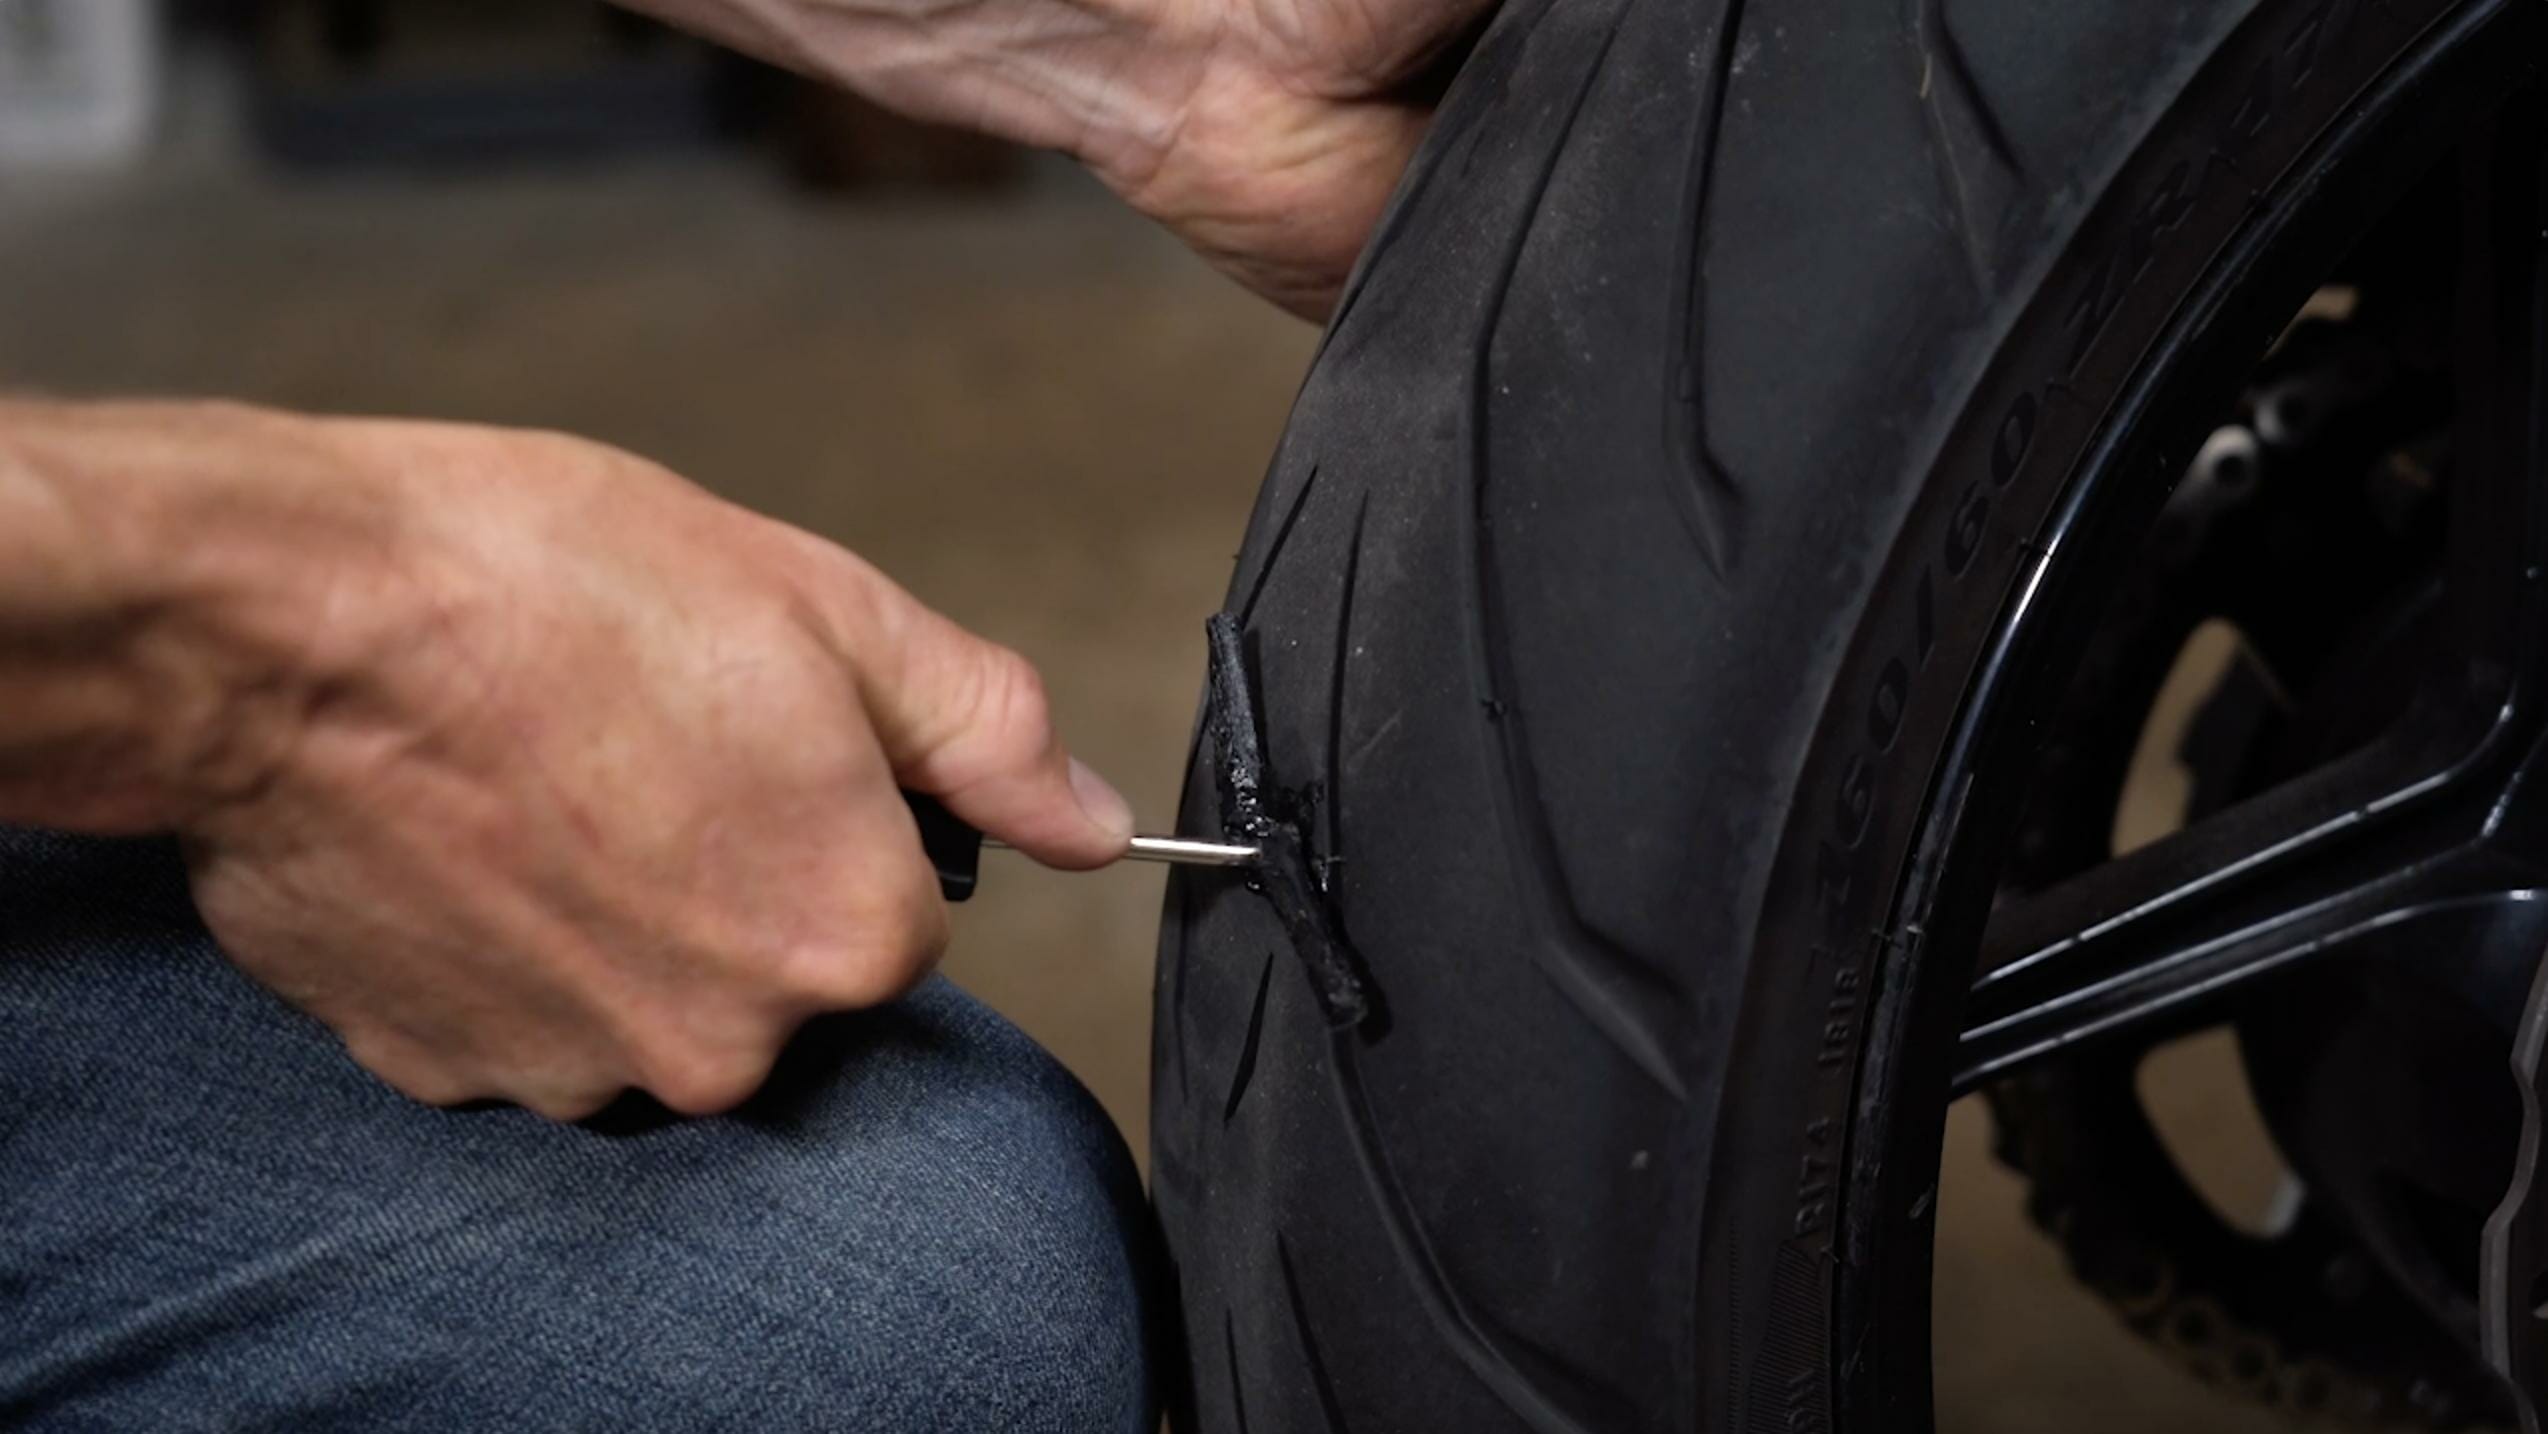 Why should you not repair punctured motorcycle tires